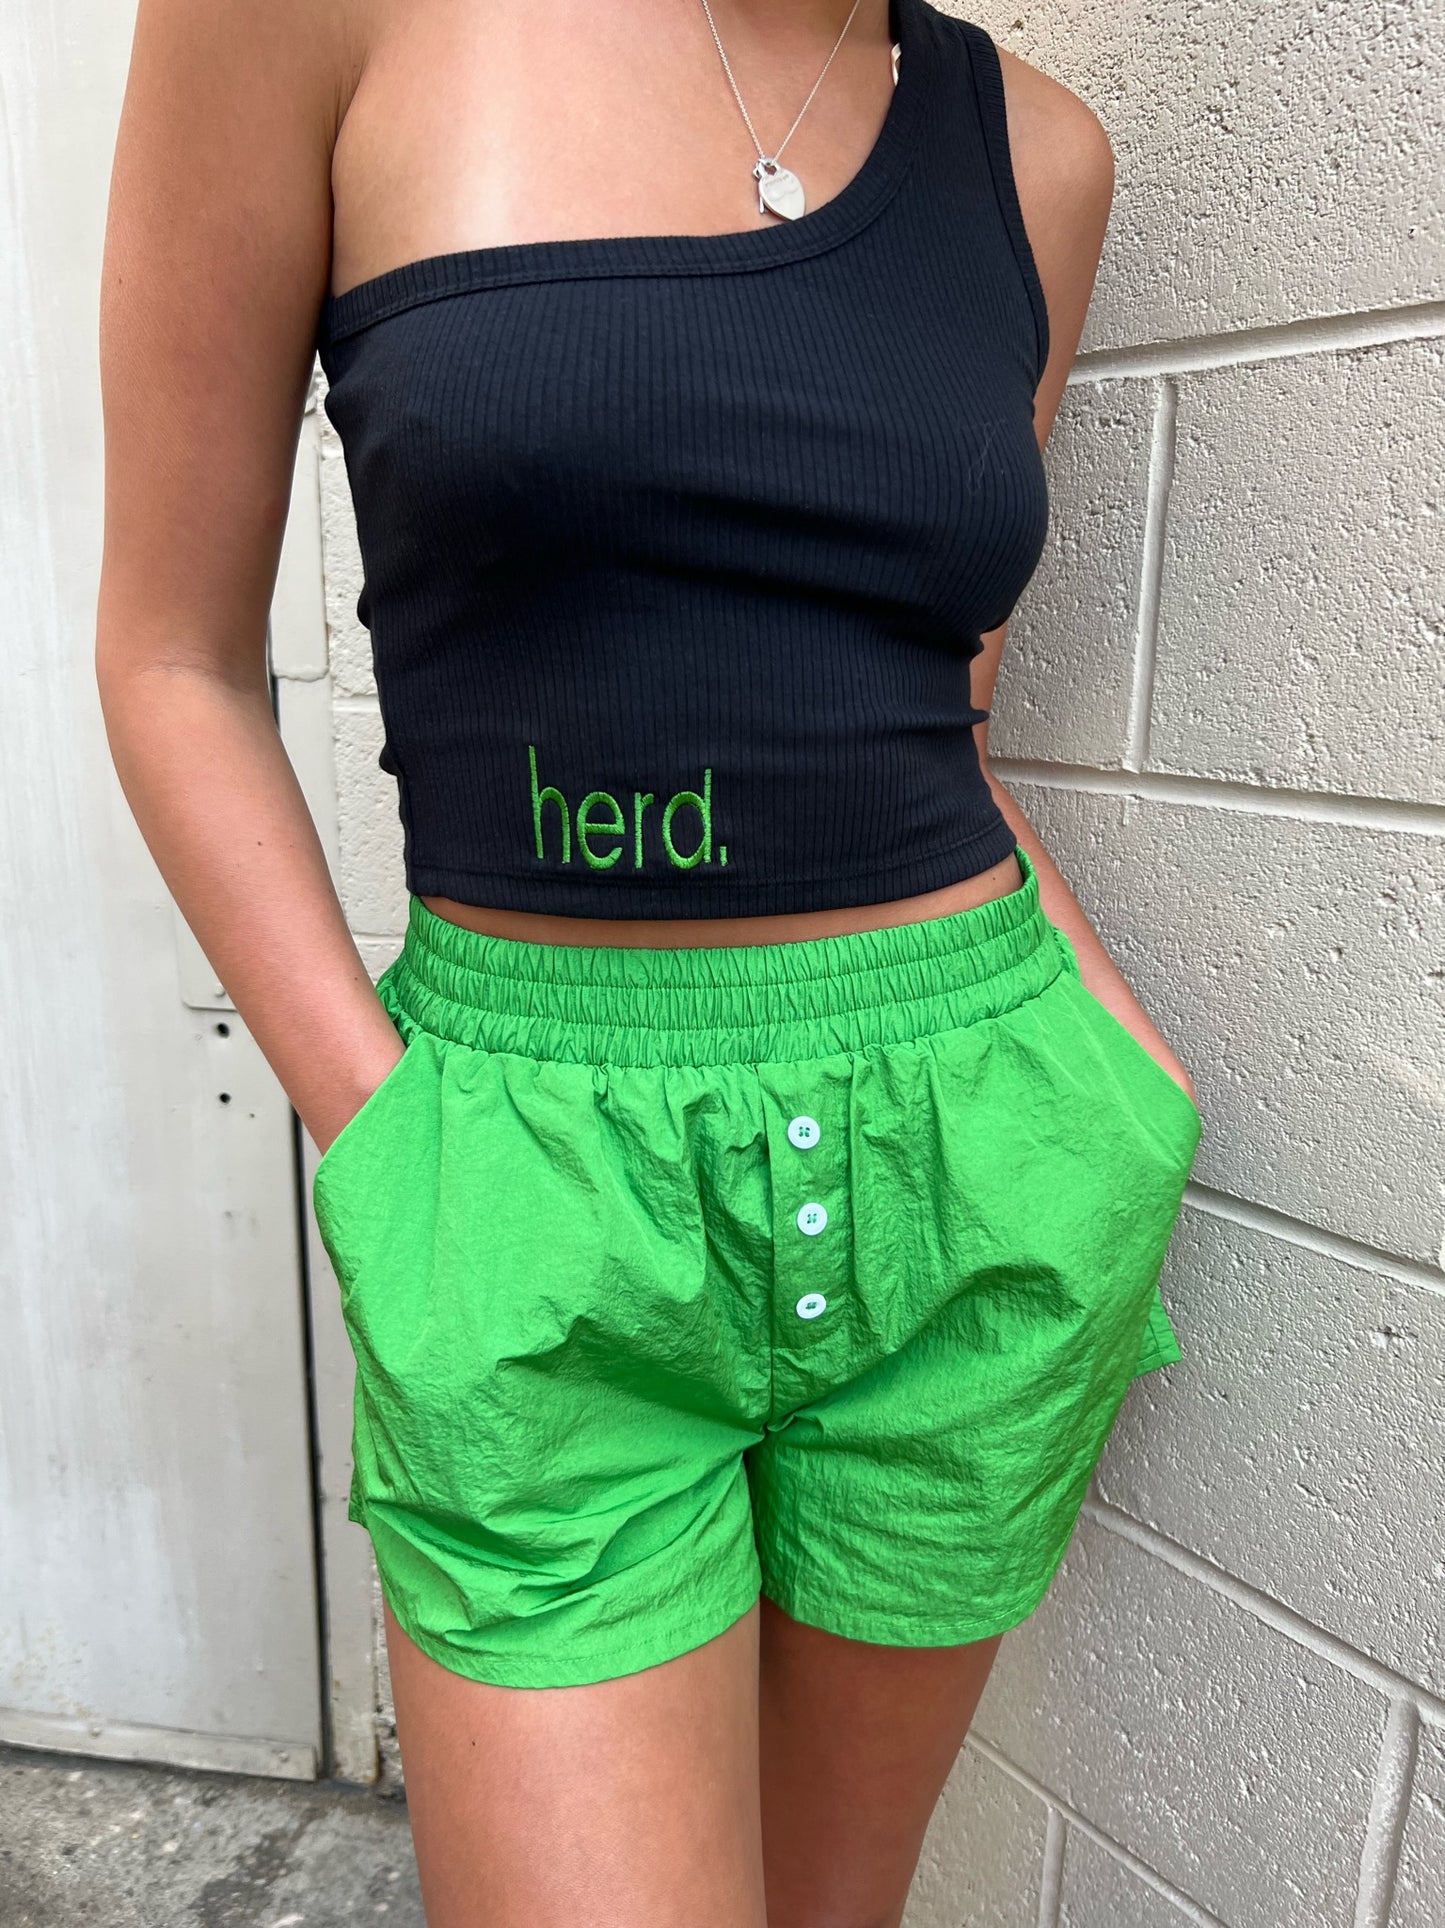 VINTAGE CHEER NYLON SHORTS IN GREEN - THE HIP EAGLE BOUTIQUE